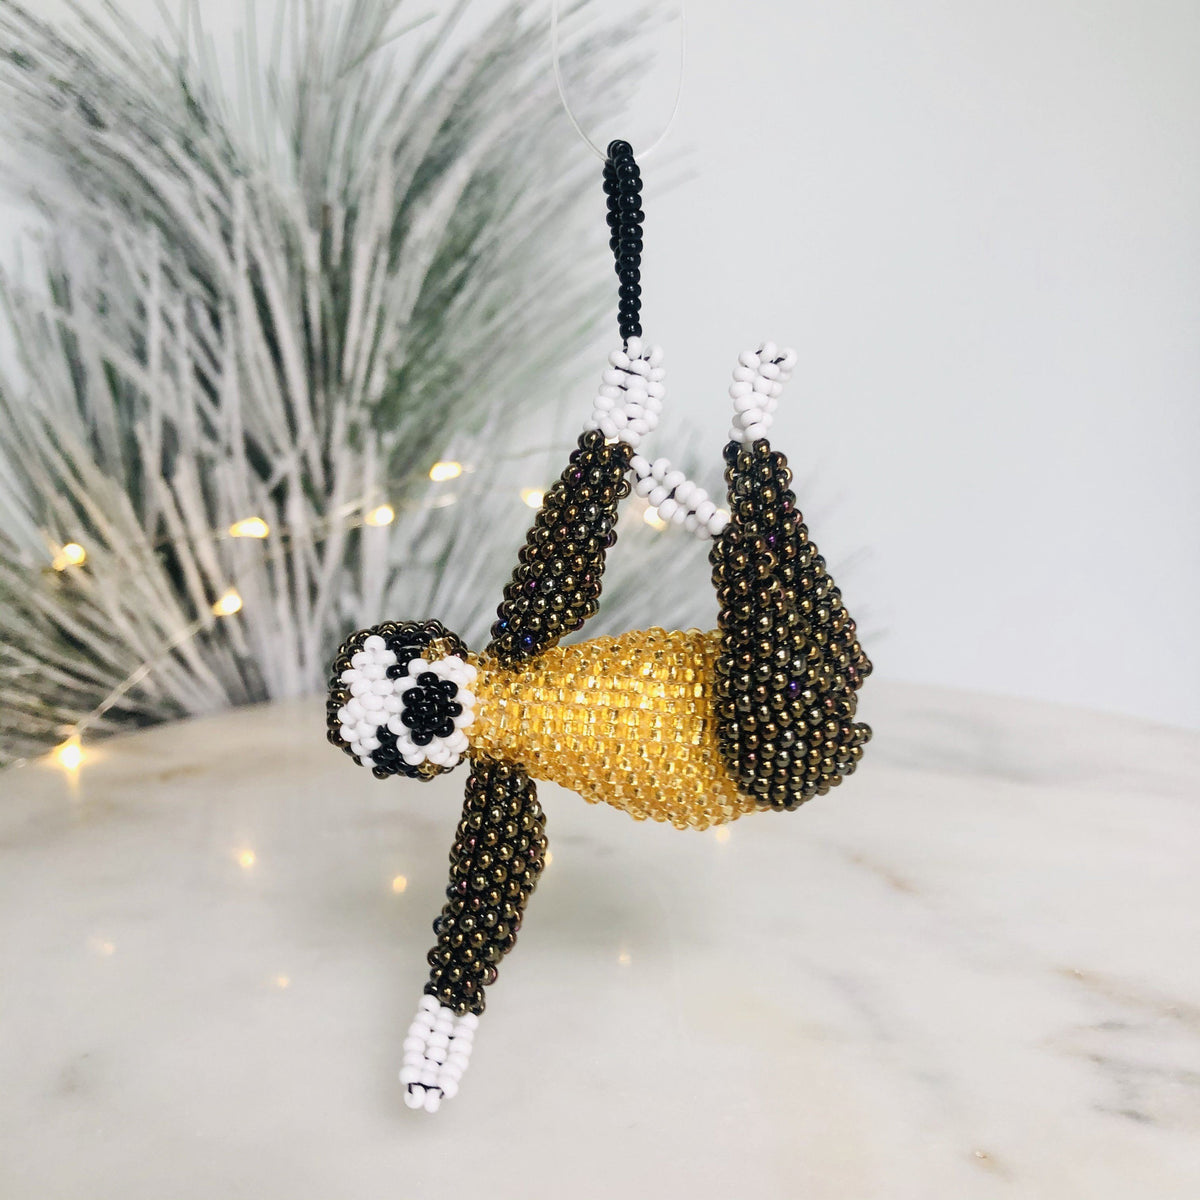 Glass Bead Ornament, Sloth Ornament Melange Collection 